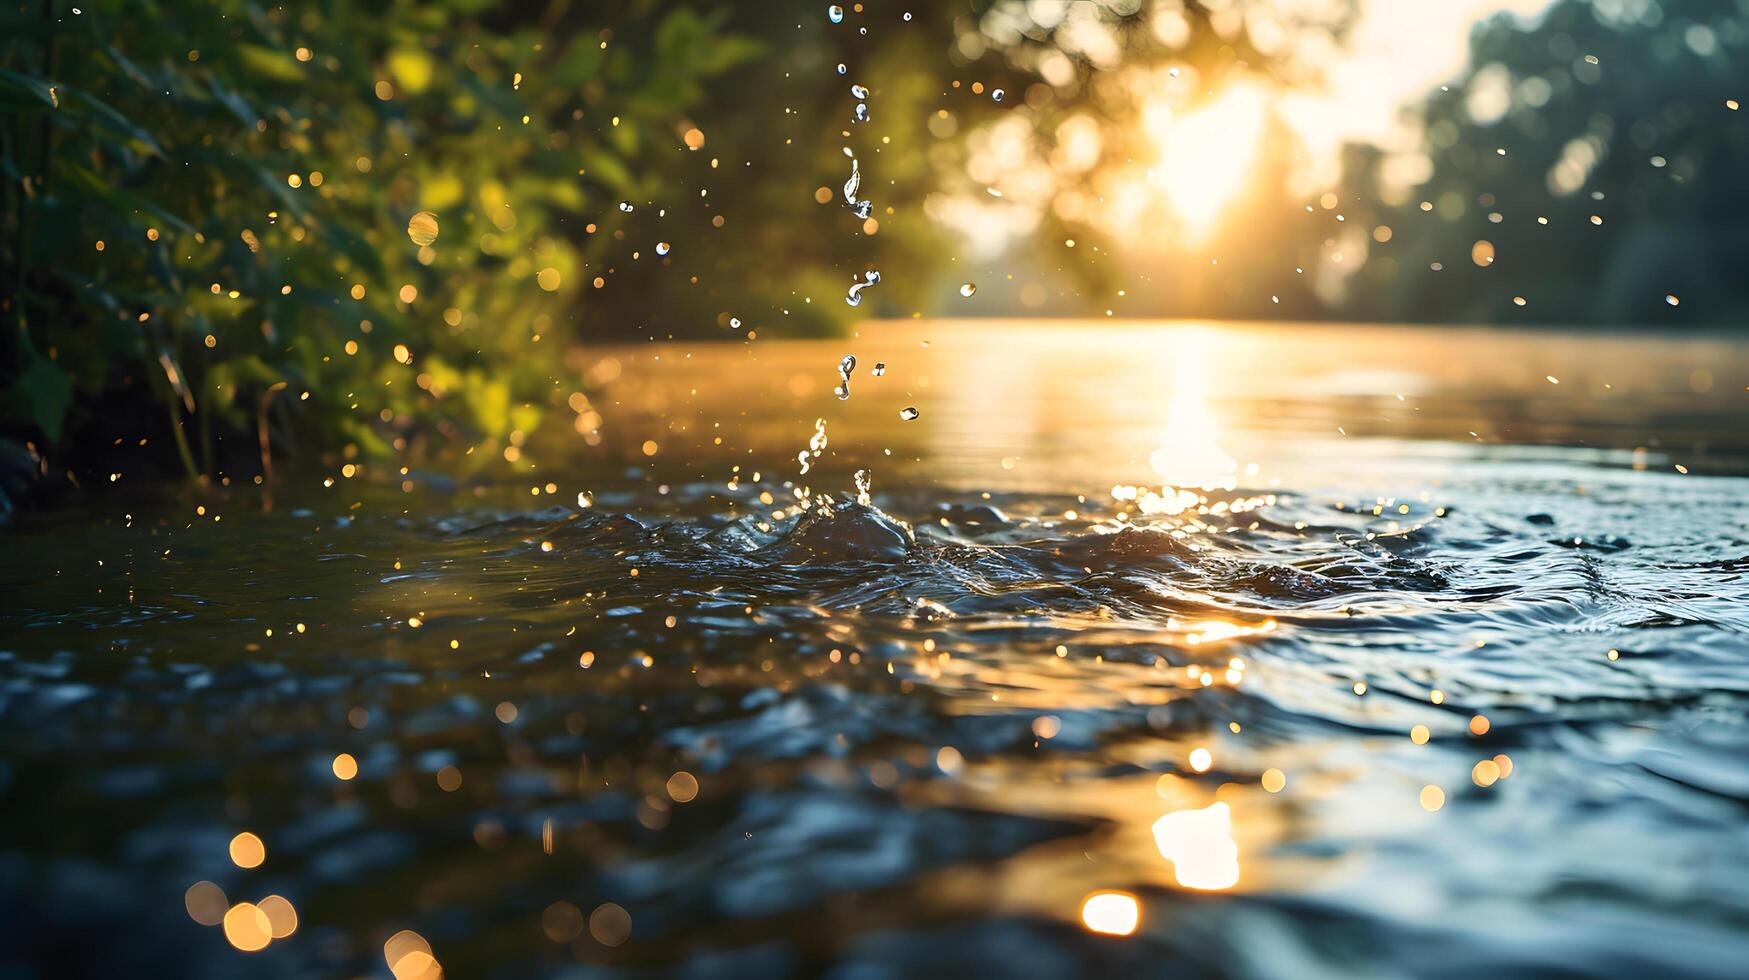 splashing water on the river bank with blurry background of sunlight and bokeh light photo